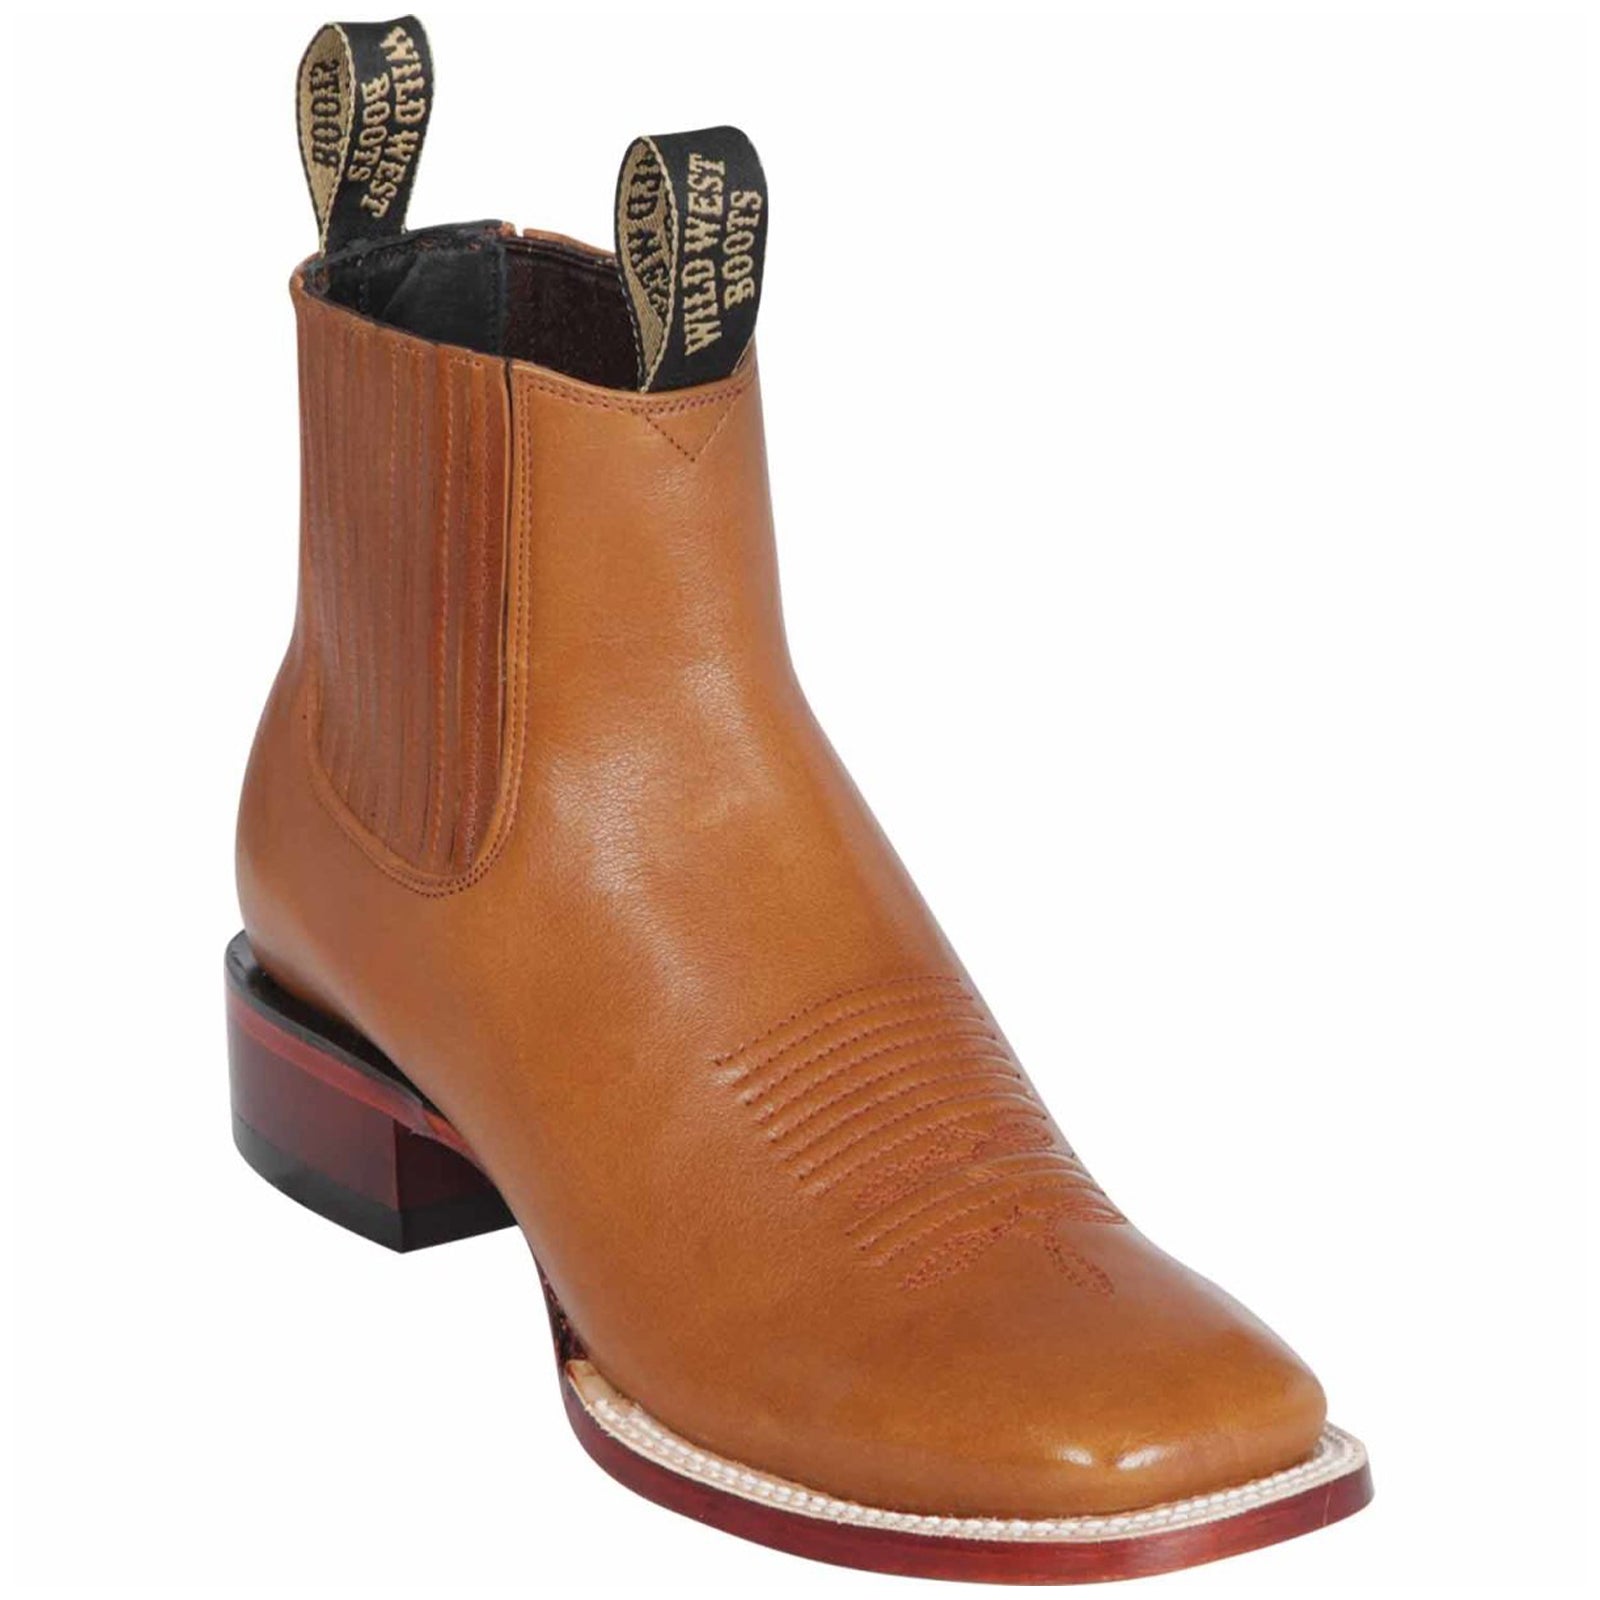 Mens Square Toe Ankle Boots - Honey